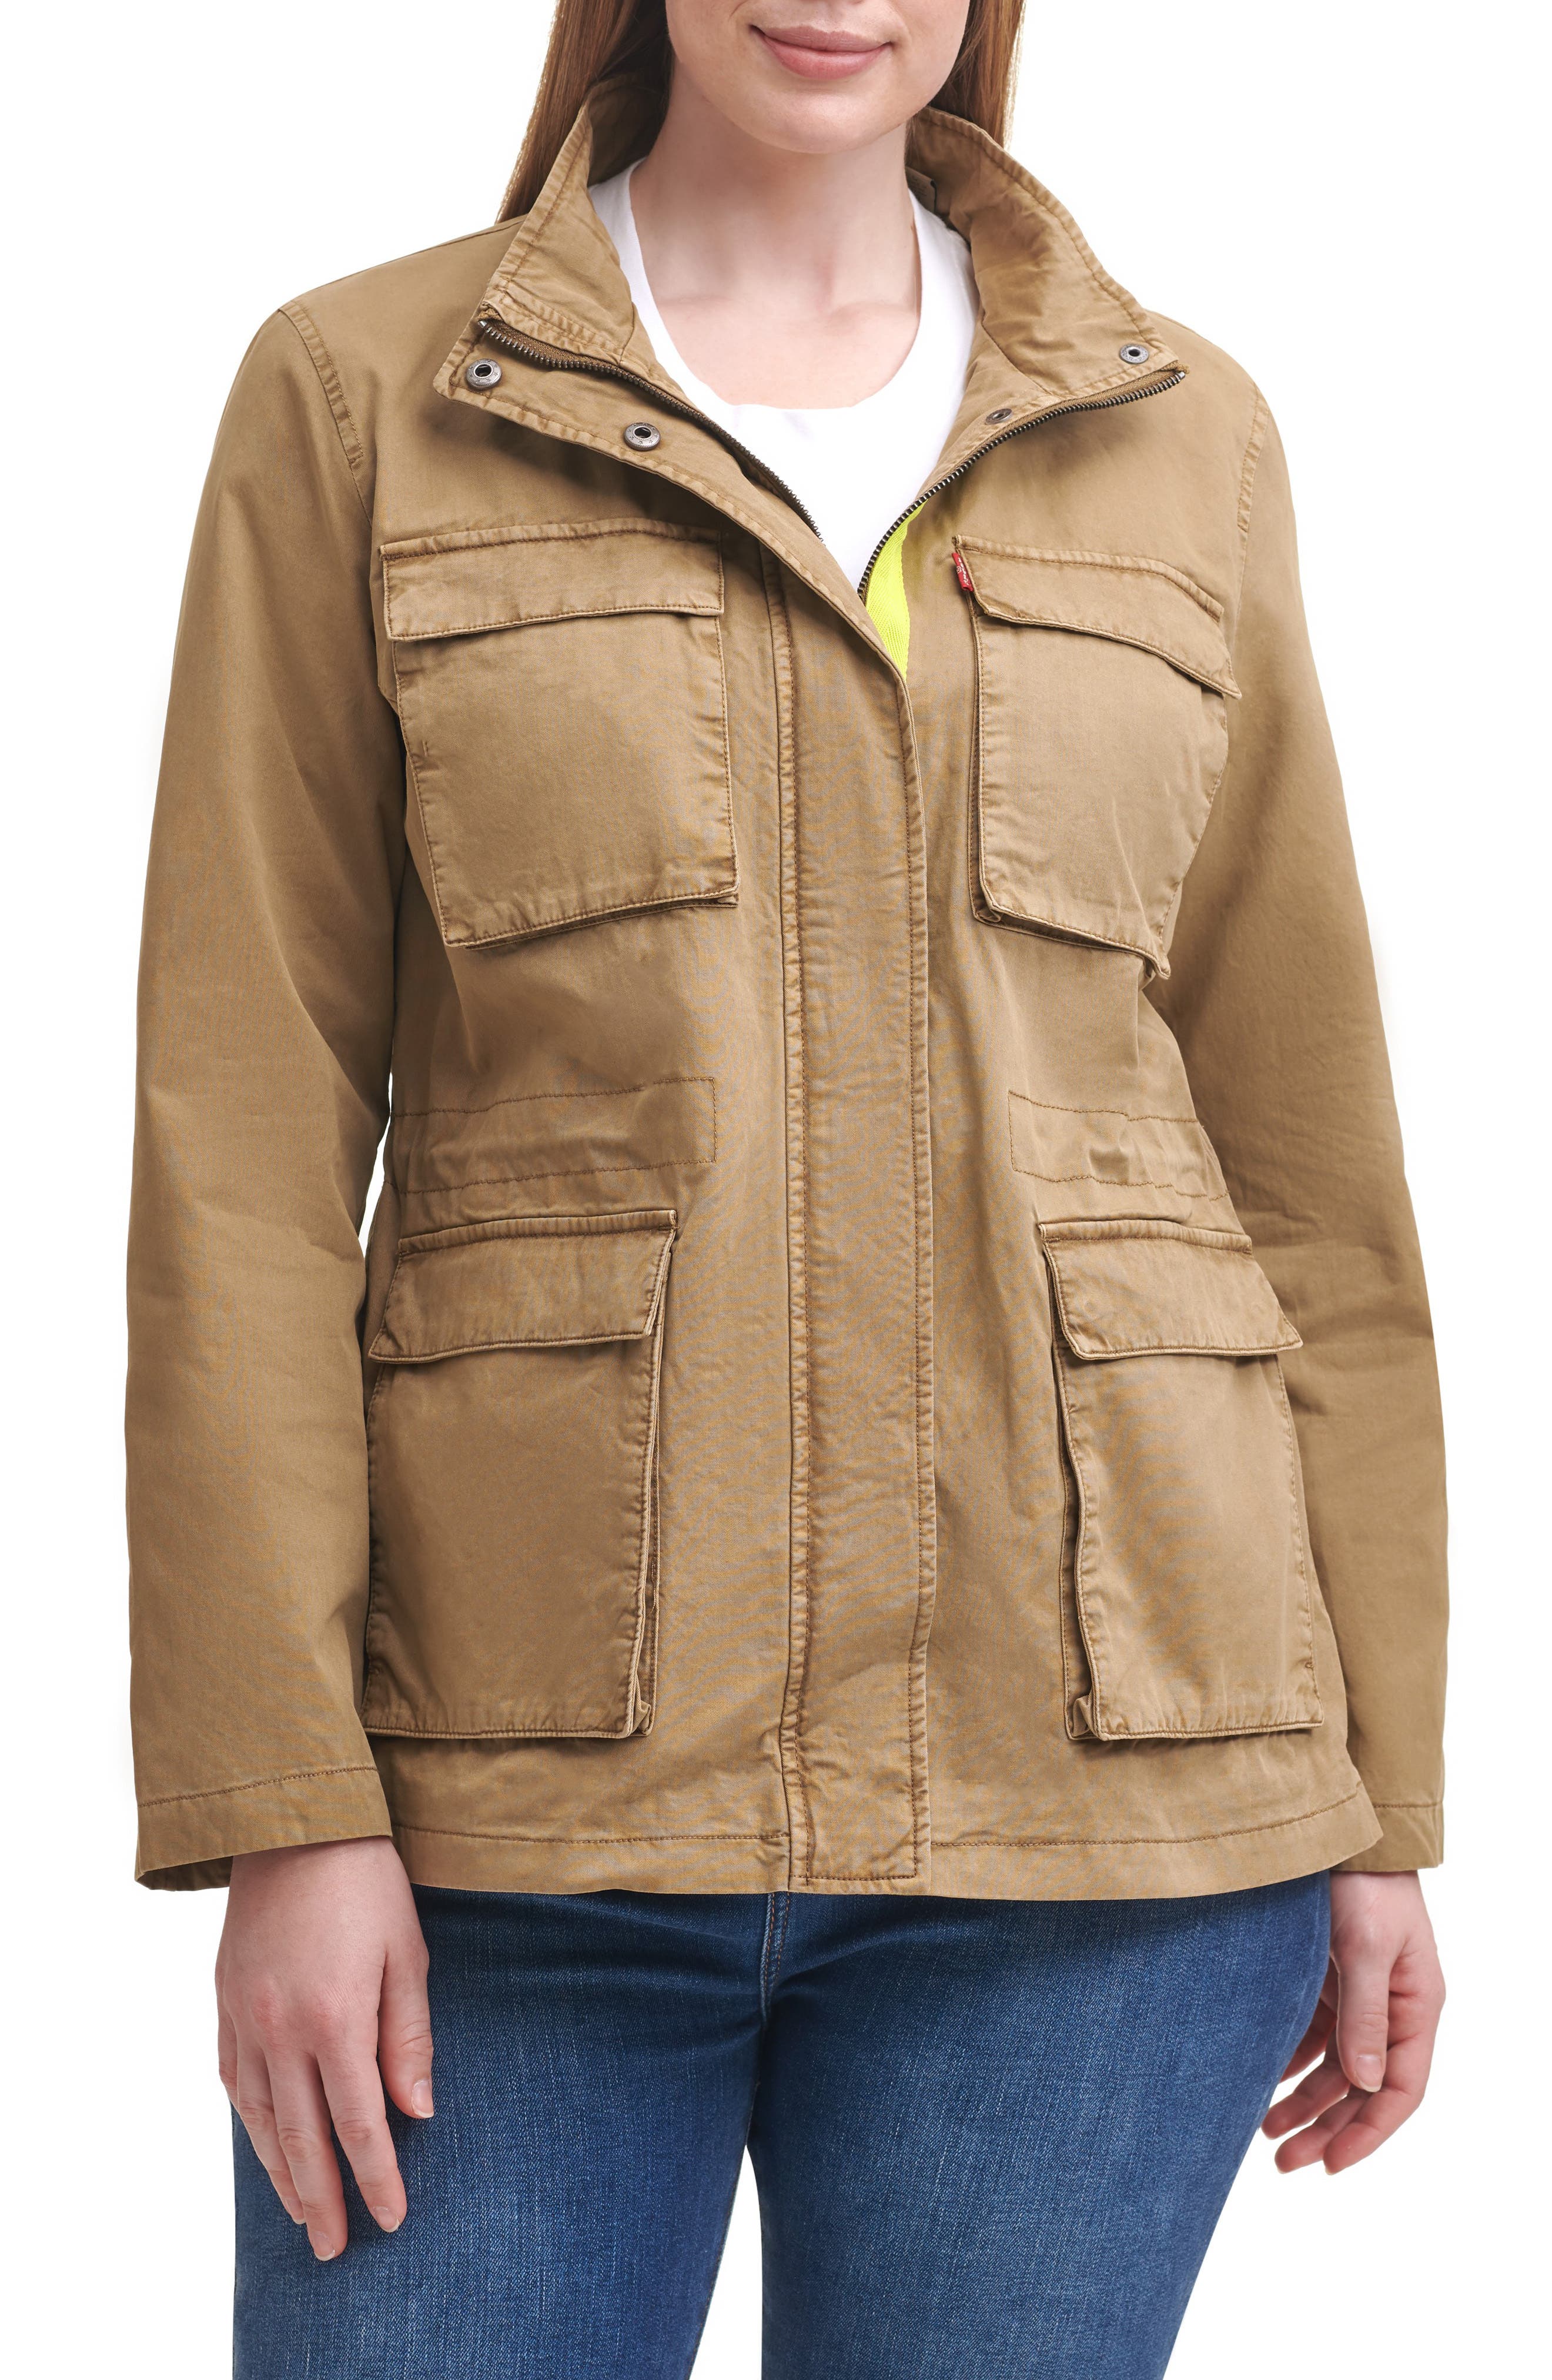 Levi's Women Cotton Twill Stand Collar Military Jacket